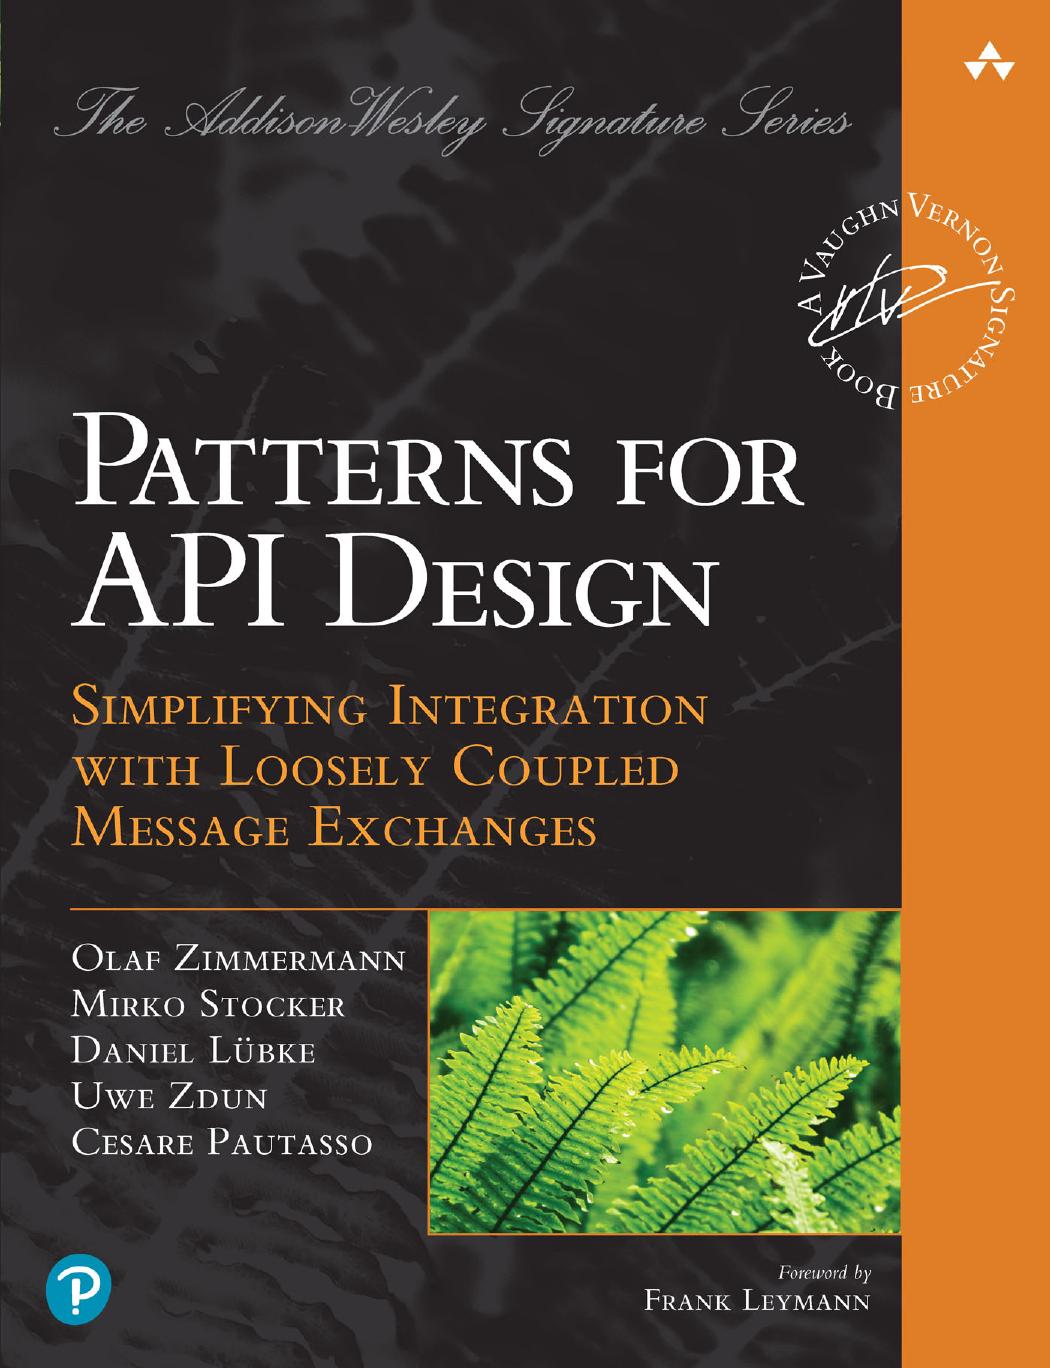 Patterns for API Design: Simplifying Integration With Loosely Coupled Message Exchanges